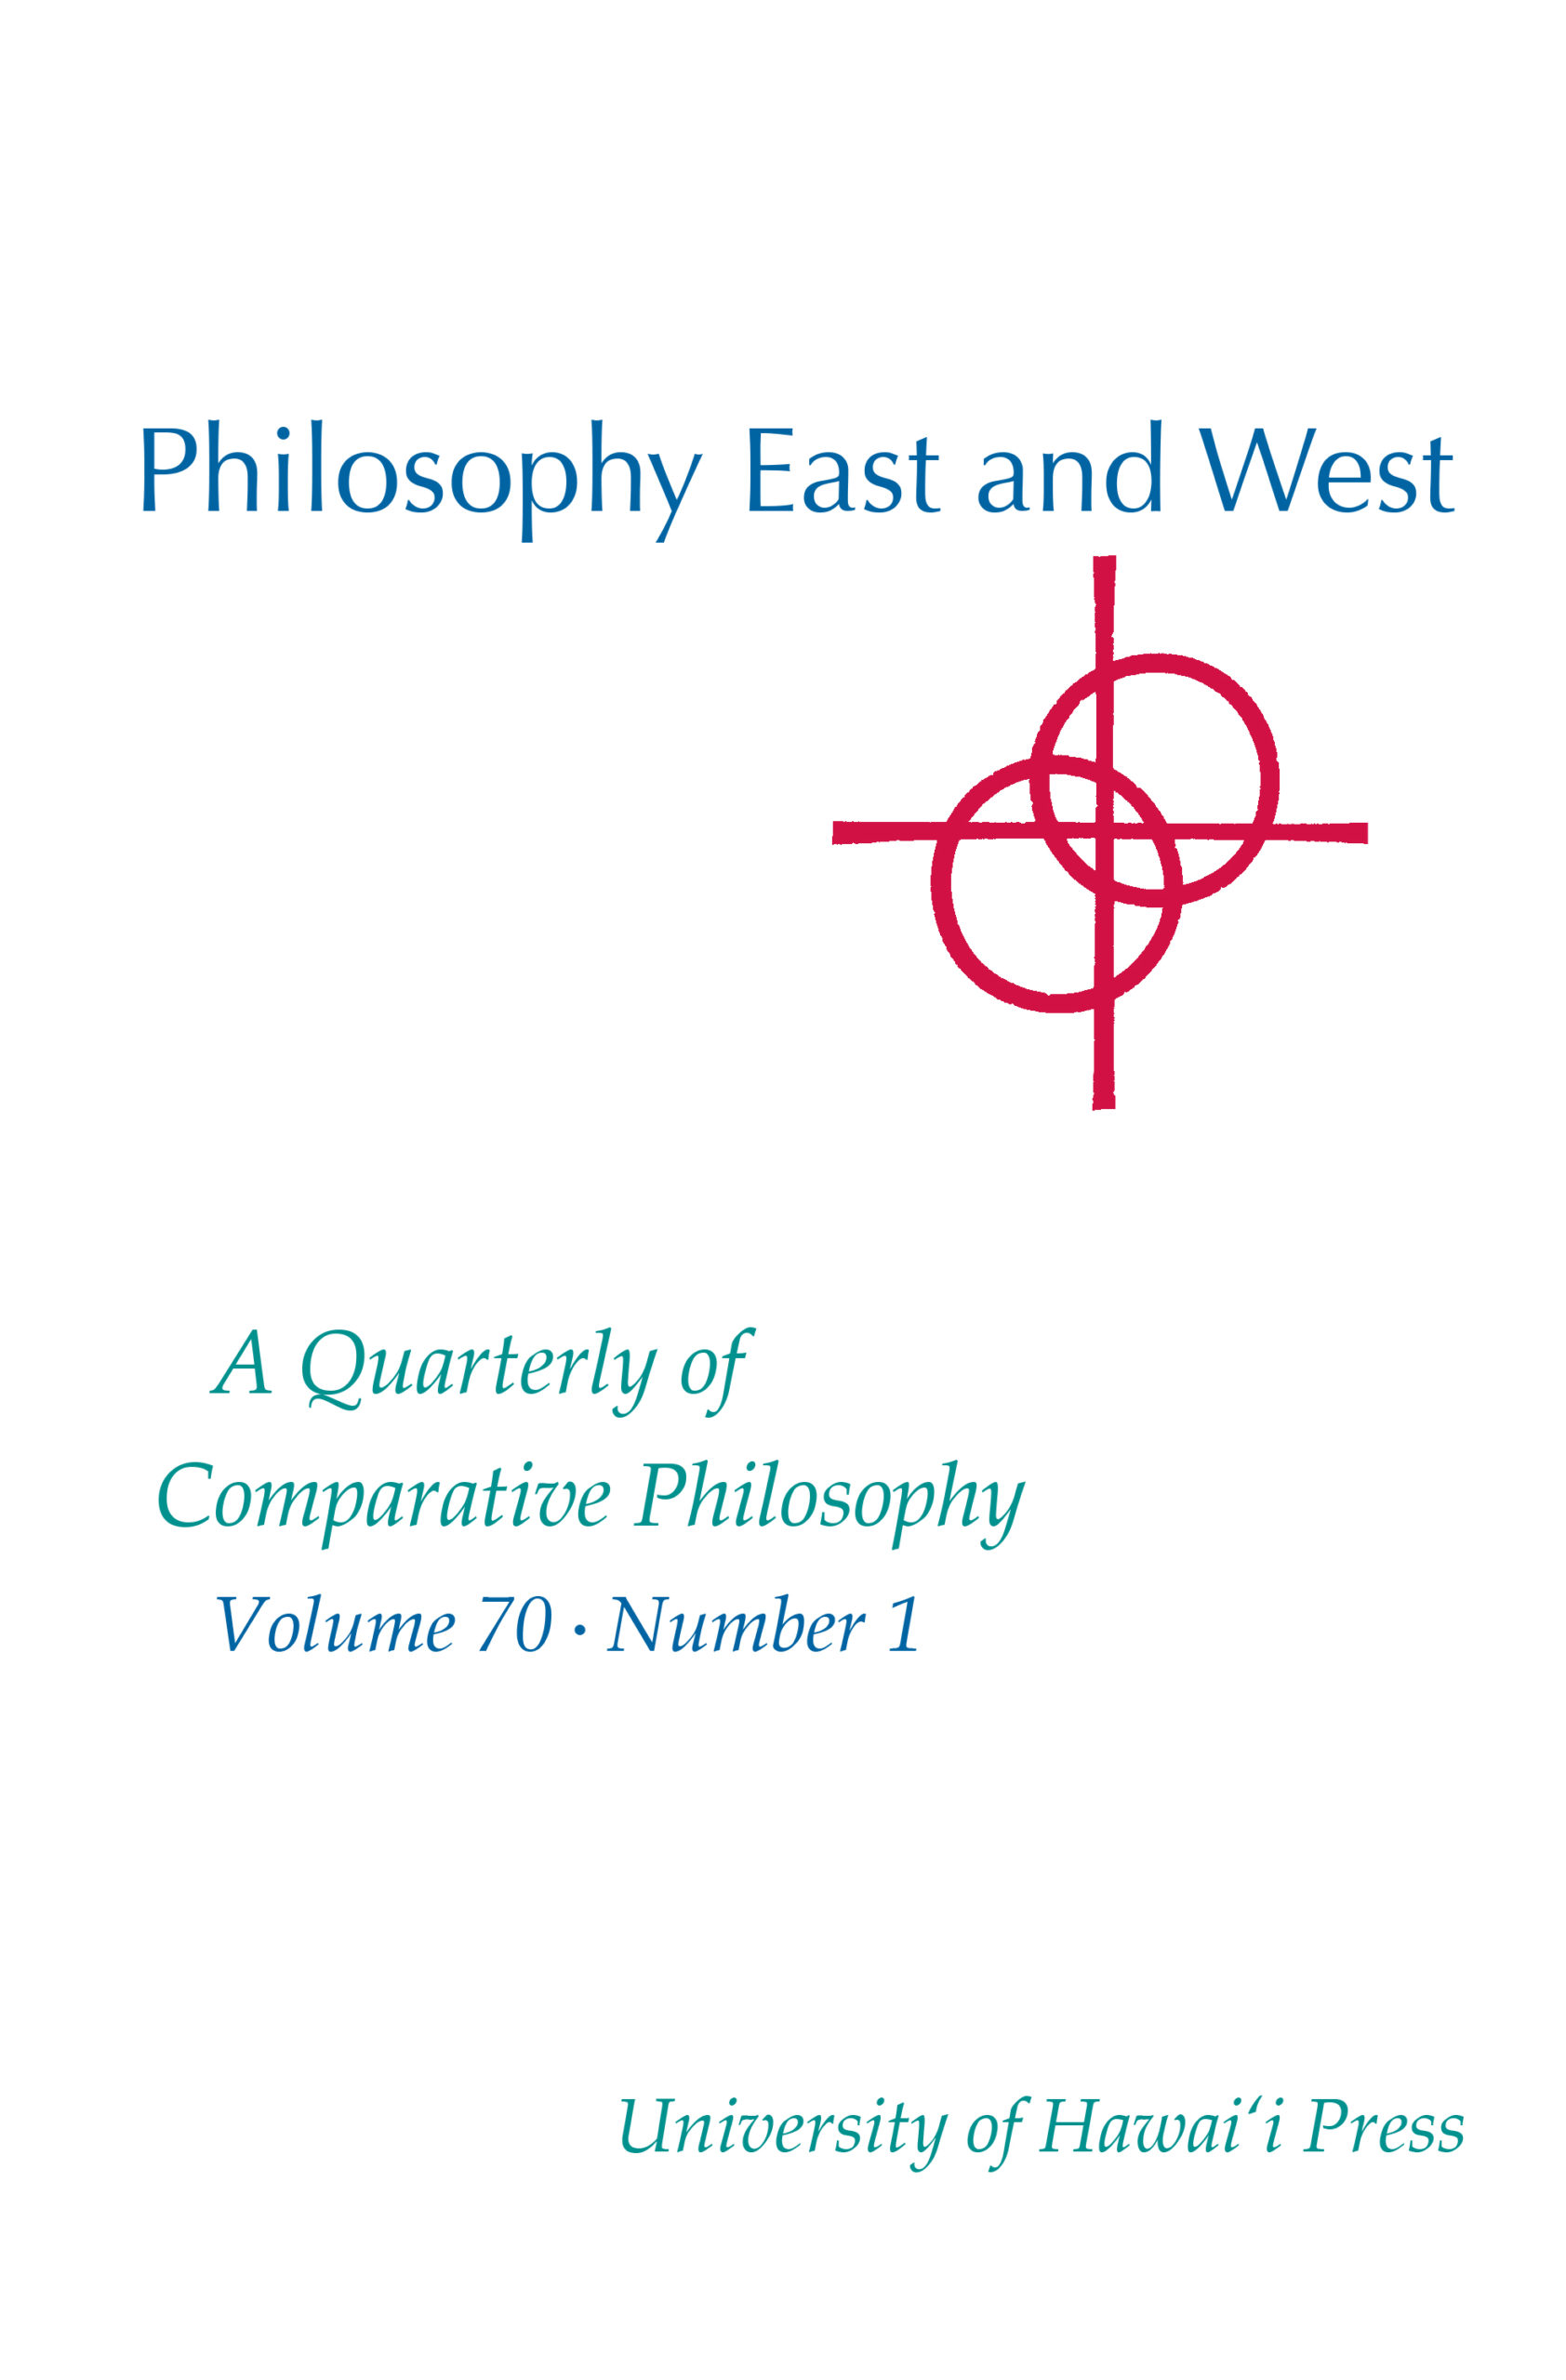 Philosophy East and West cover 70-1